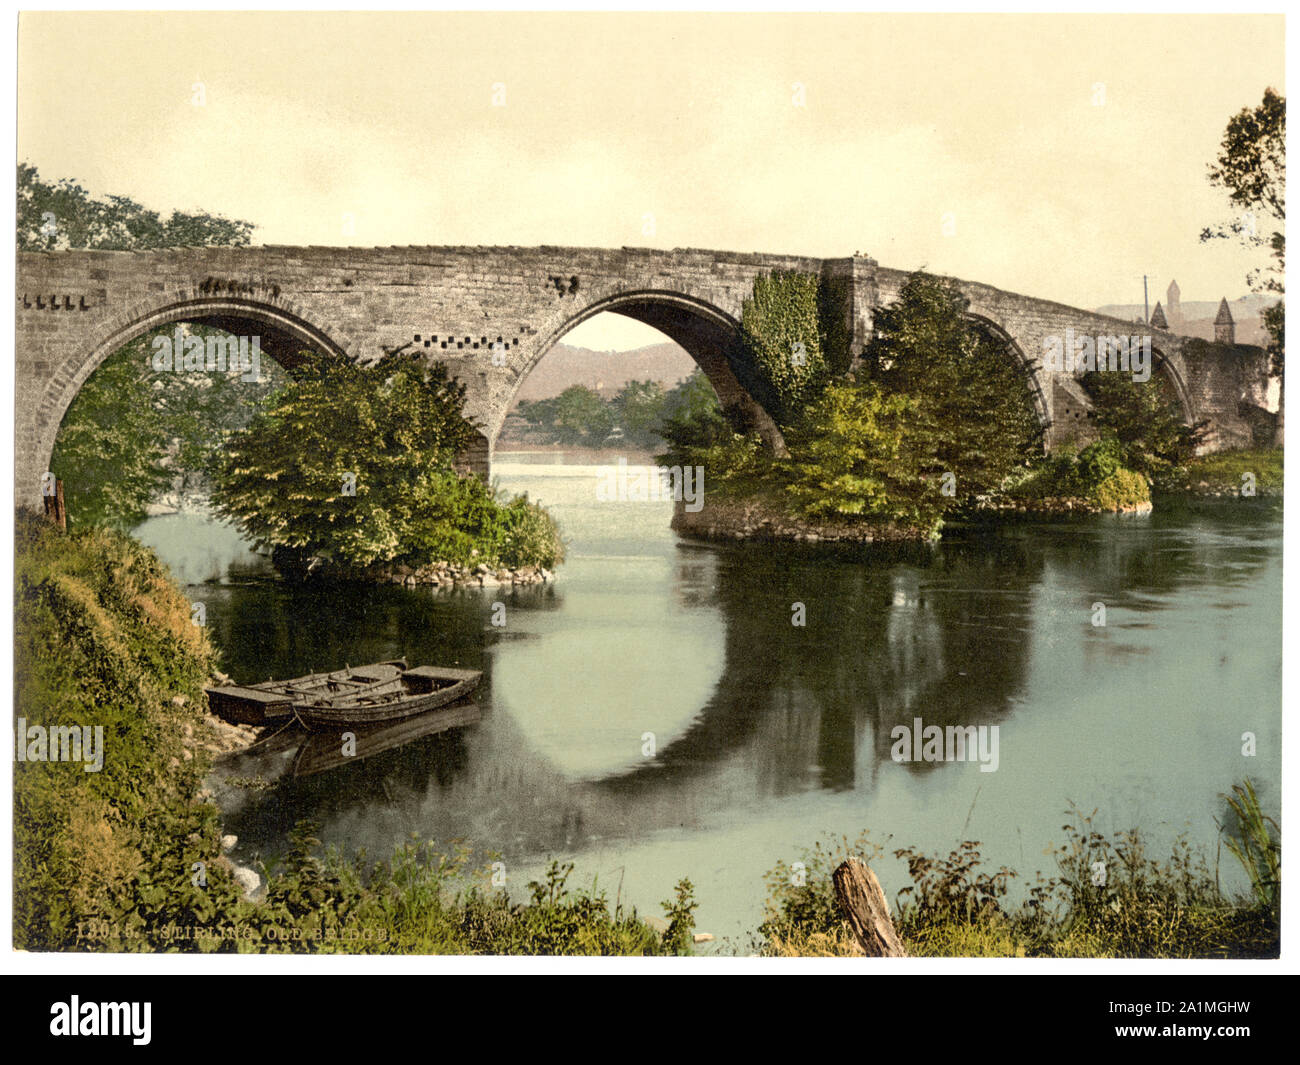 Old bridge, Stirling, Scotland; Title from the Detroit Publishing Co., catalogue J-foreign section. Detroit, Mich. : Detroit Photographic Company, 1905.; Stock Photo